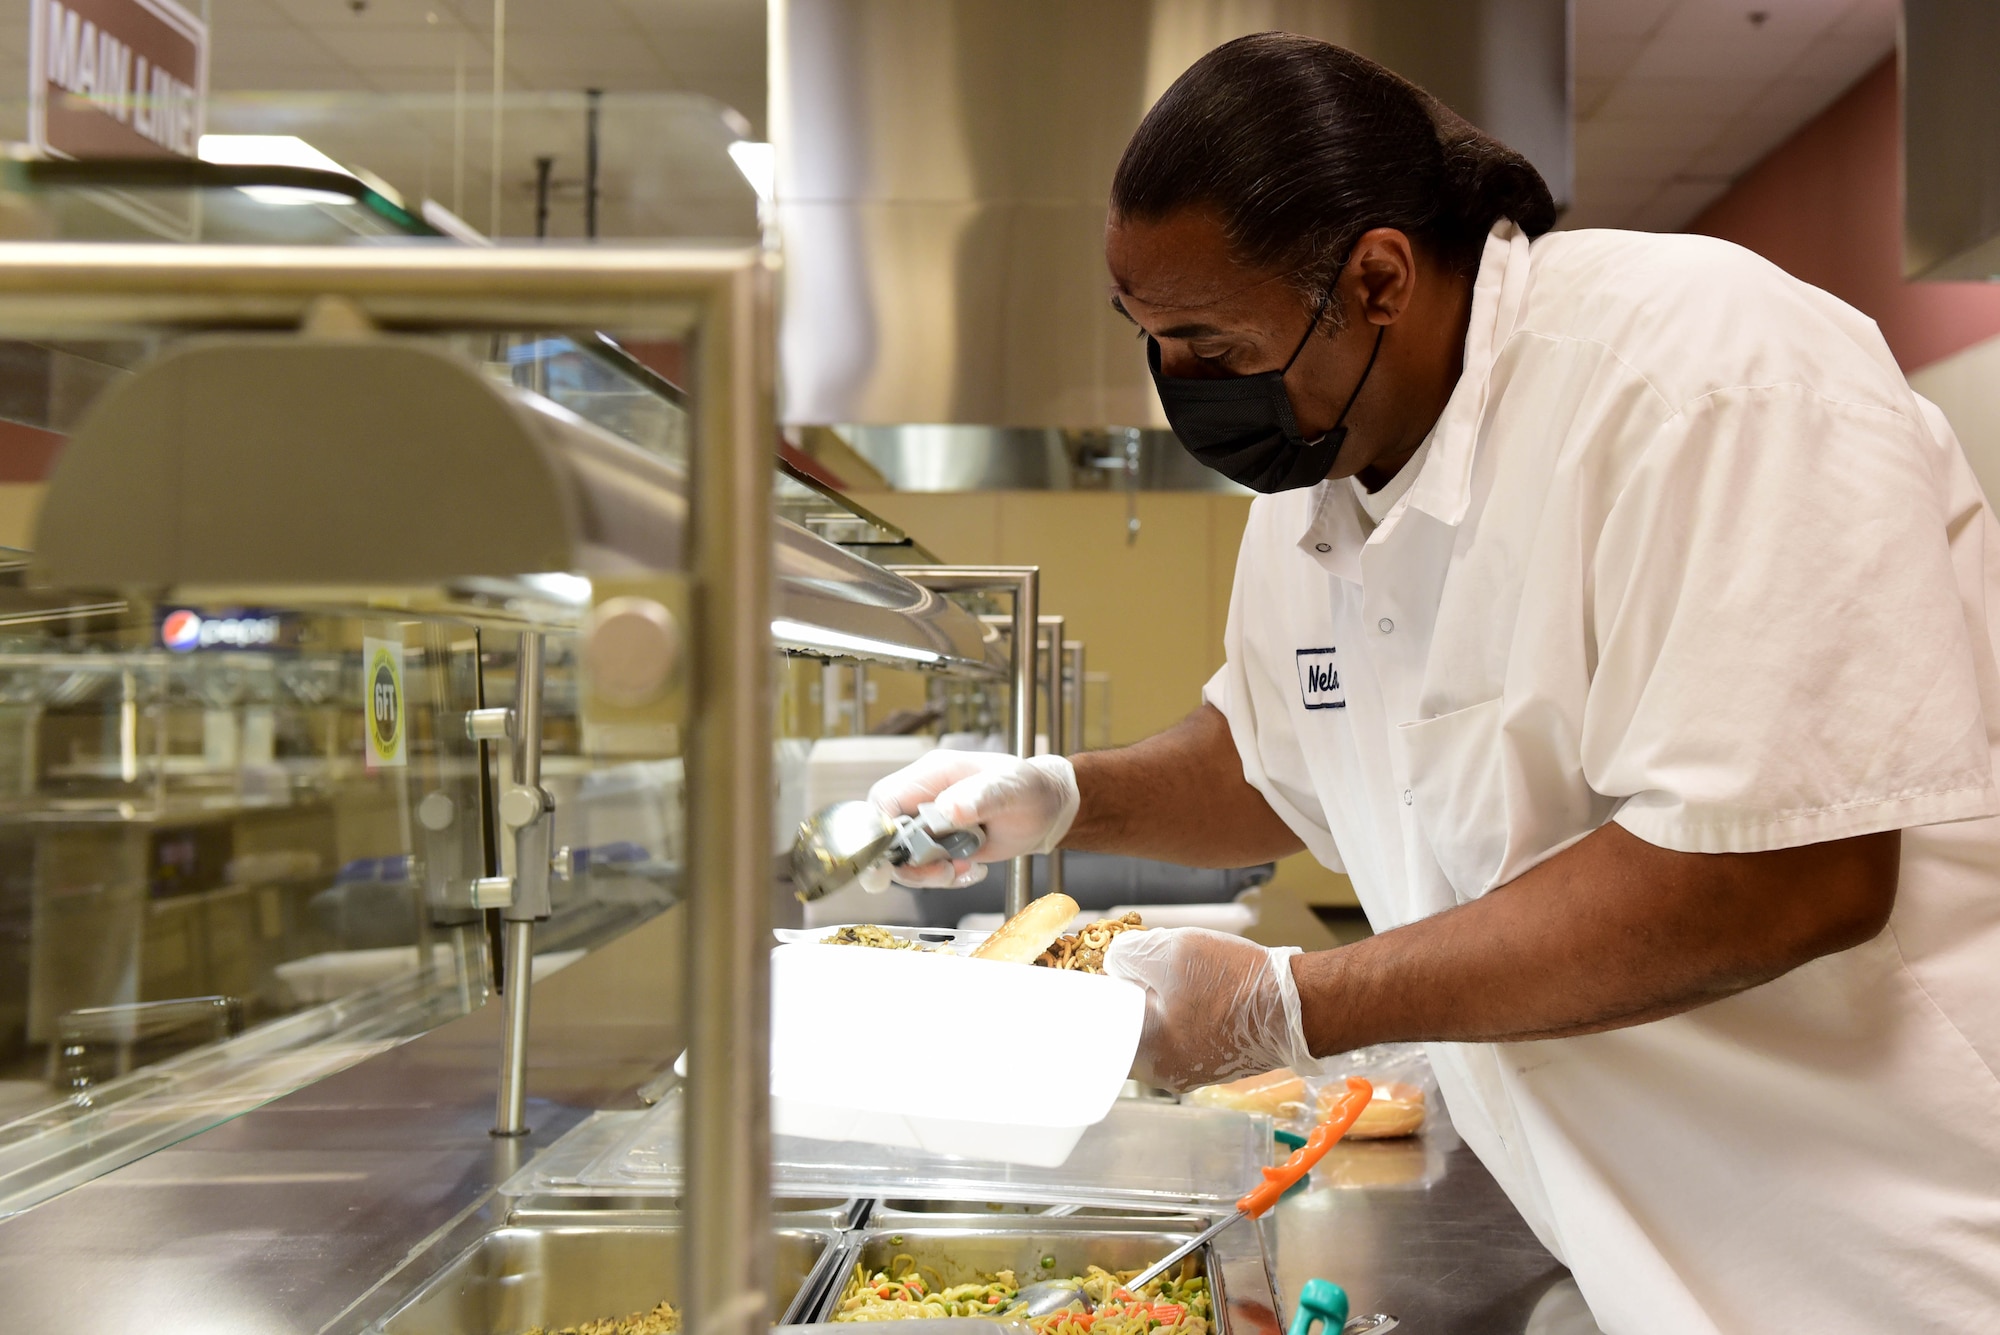 Nelson O’Neal, Guardian Dining Facility (DFAC) cook, prepares a to-go meal for a customer at Creech Air Force Base, Nevada, April 17, 2020.